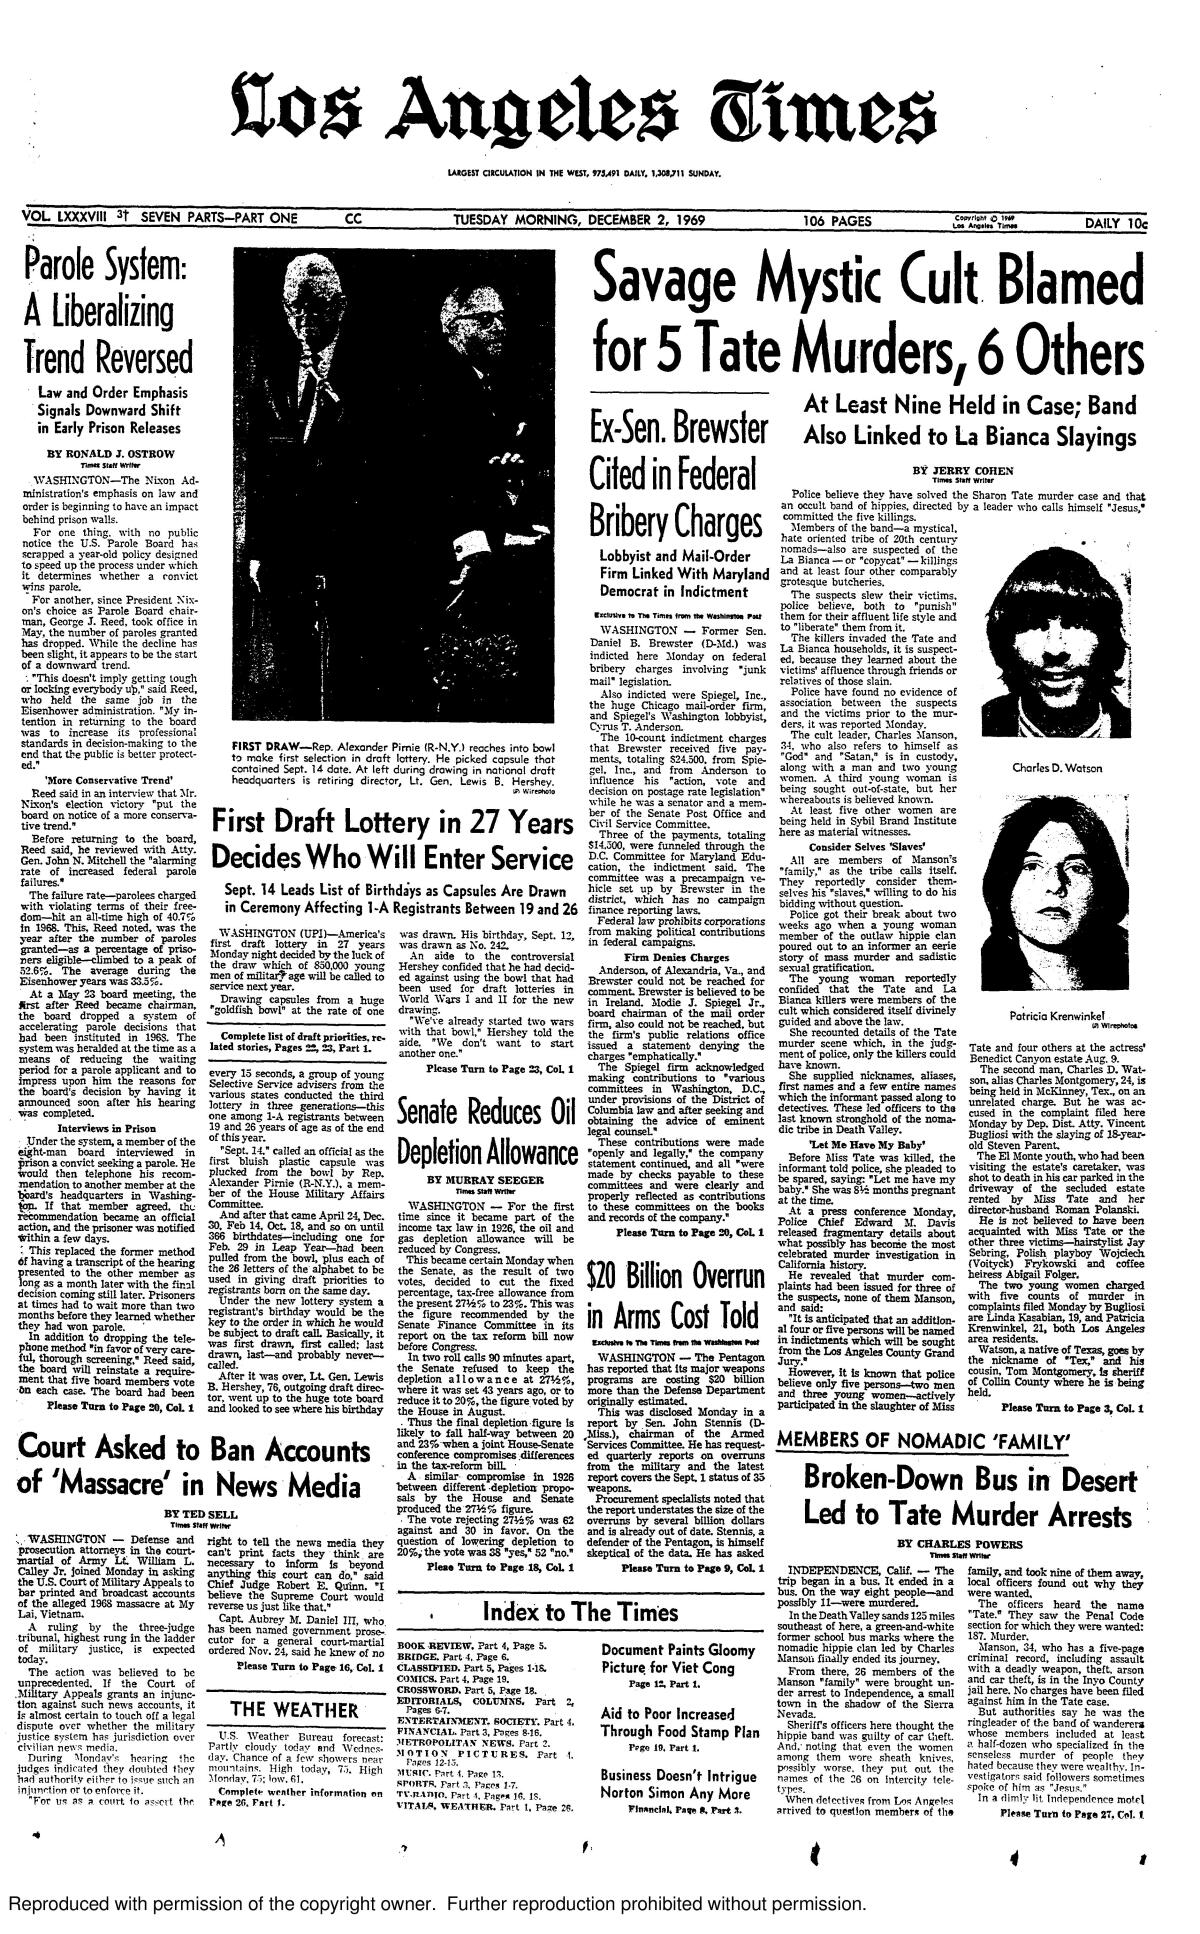 The front page of the Los Angeles Times on Dec. 2, 1969